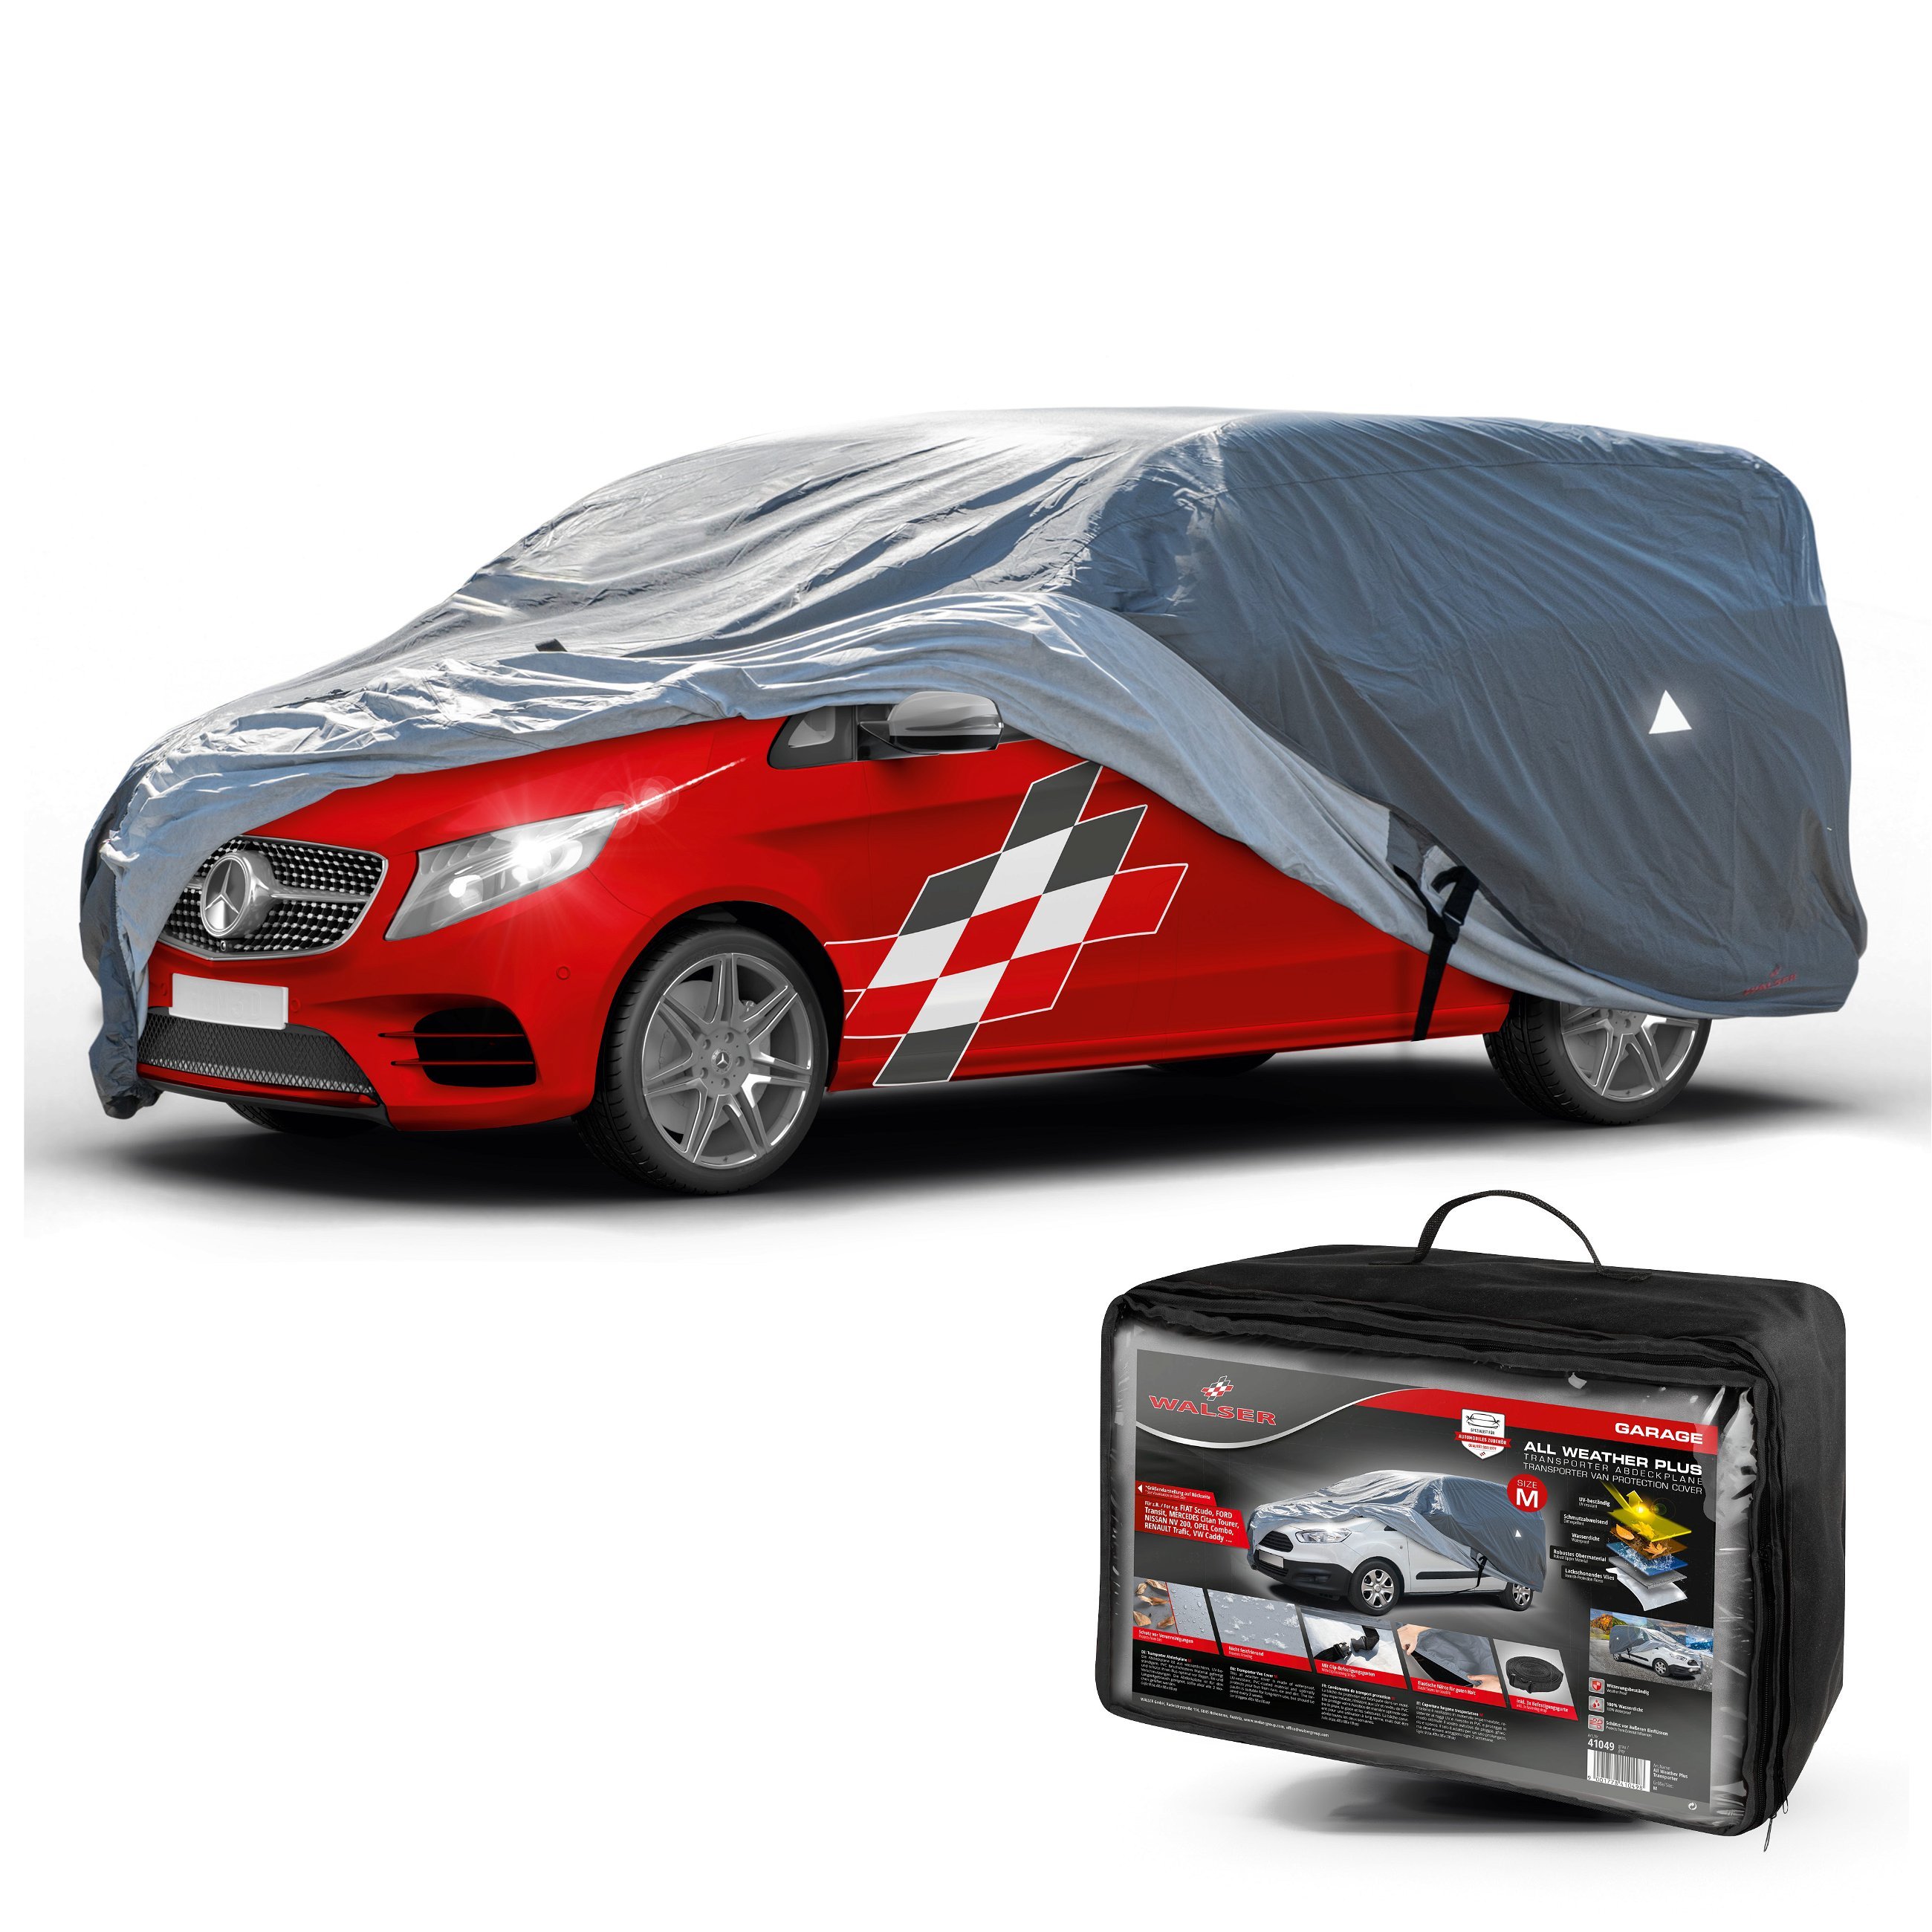 Car cover All Weather Plus, Van cover size XL